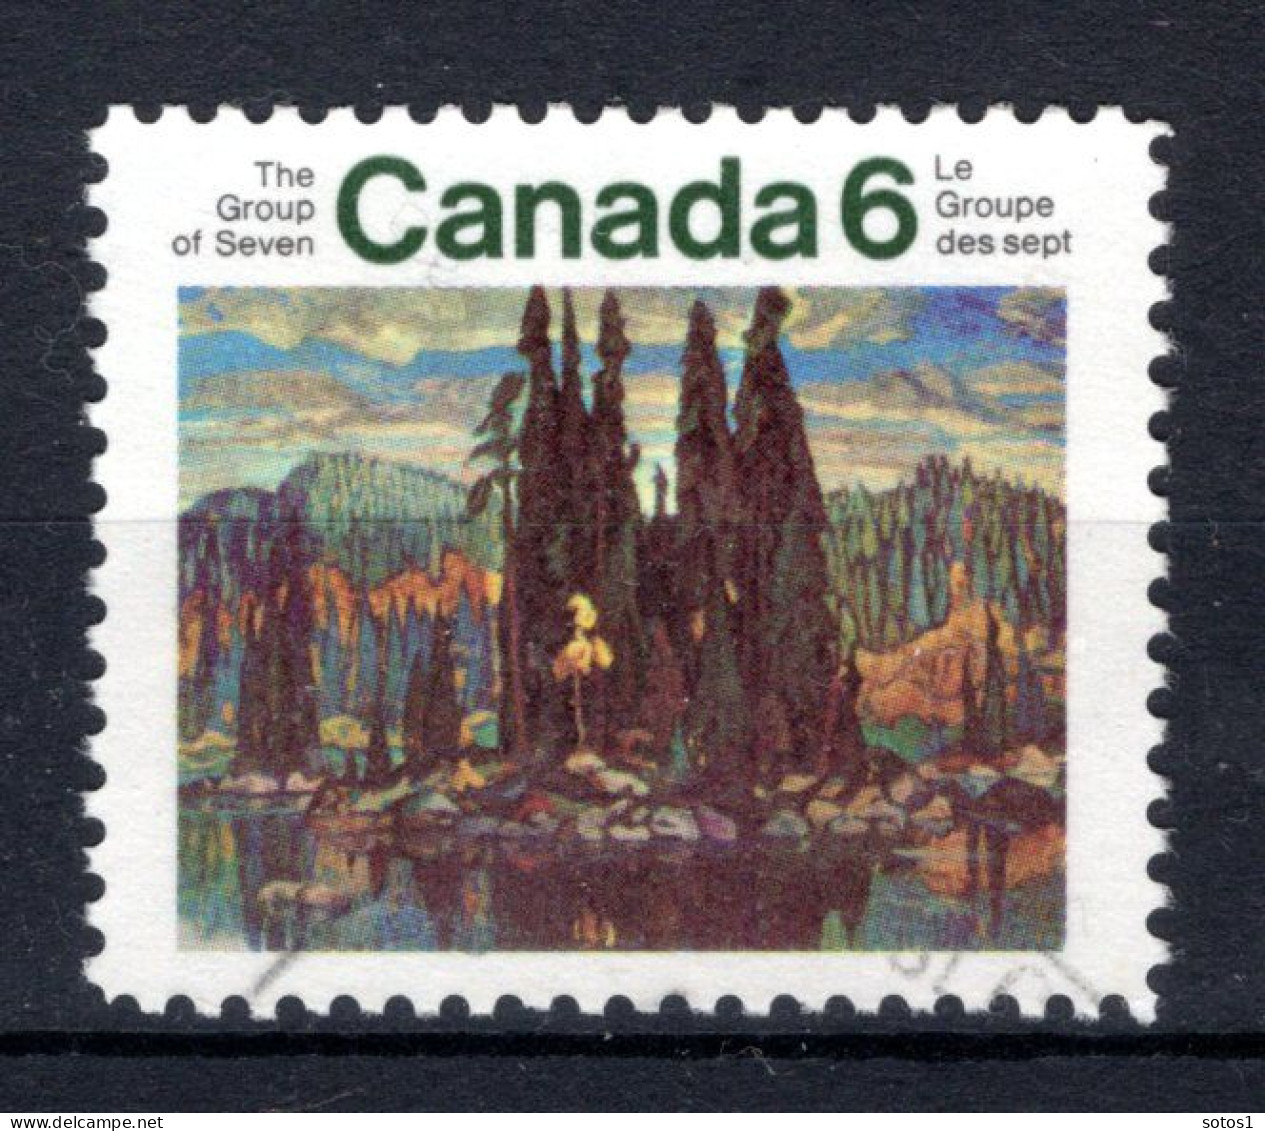 CANADA Yt. 451° Gestempeld 1970 - Used Stamps